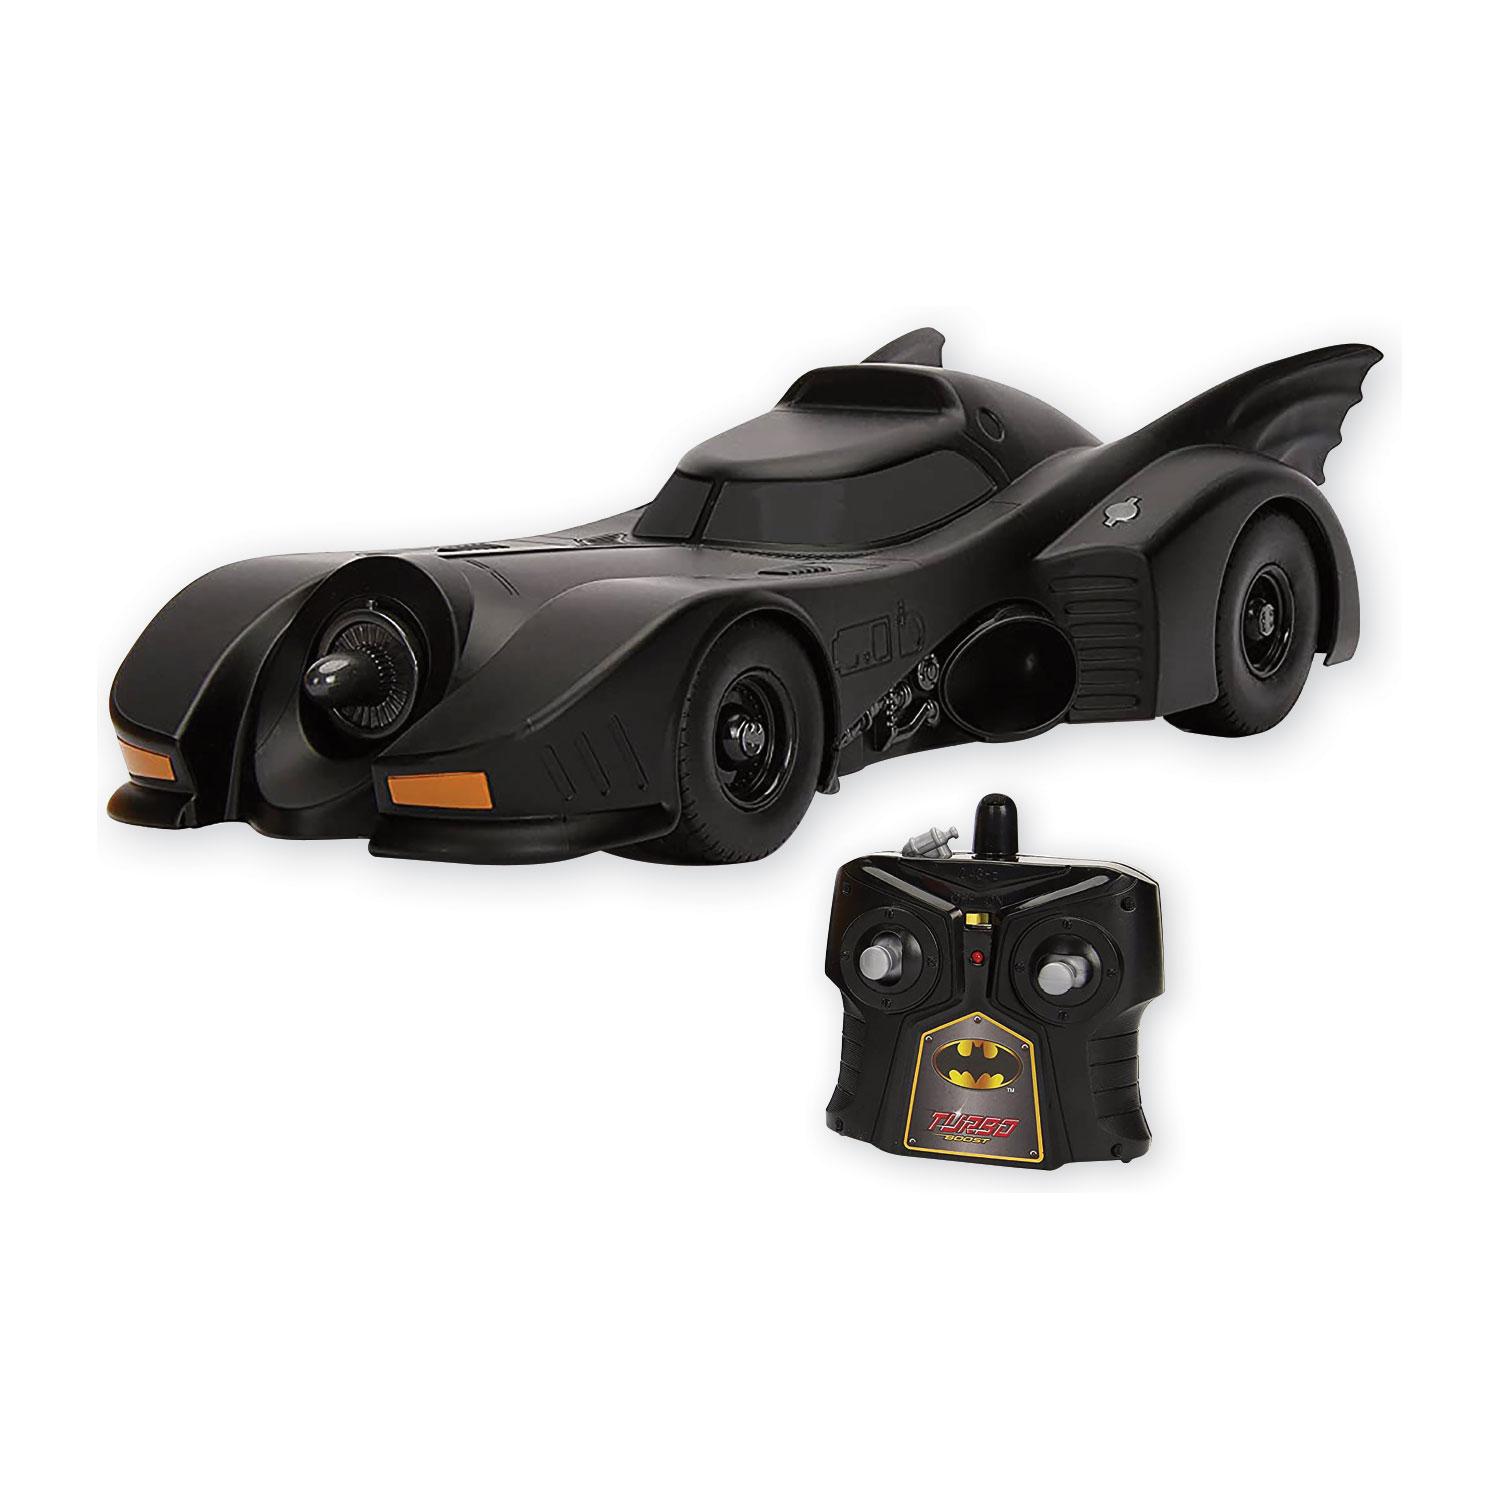 where to find remote control cars